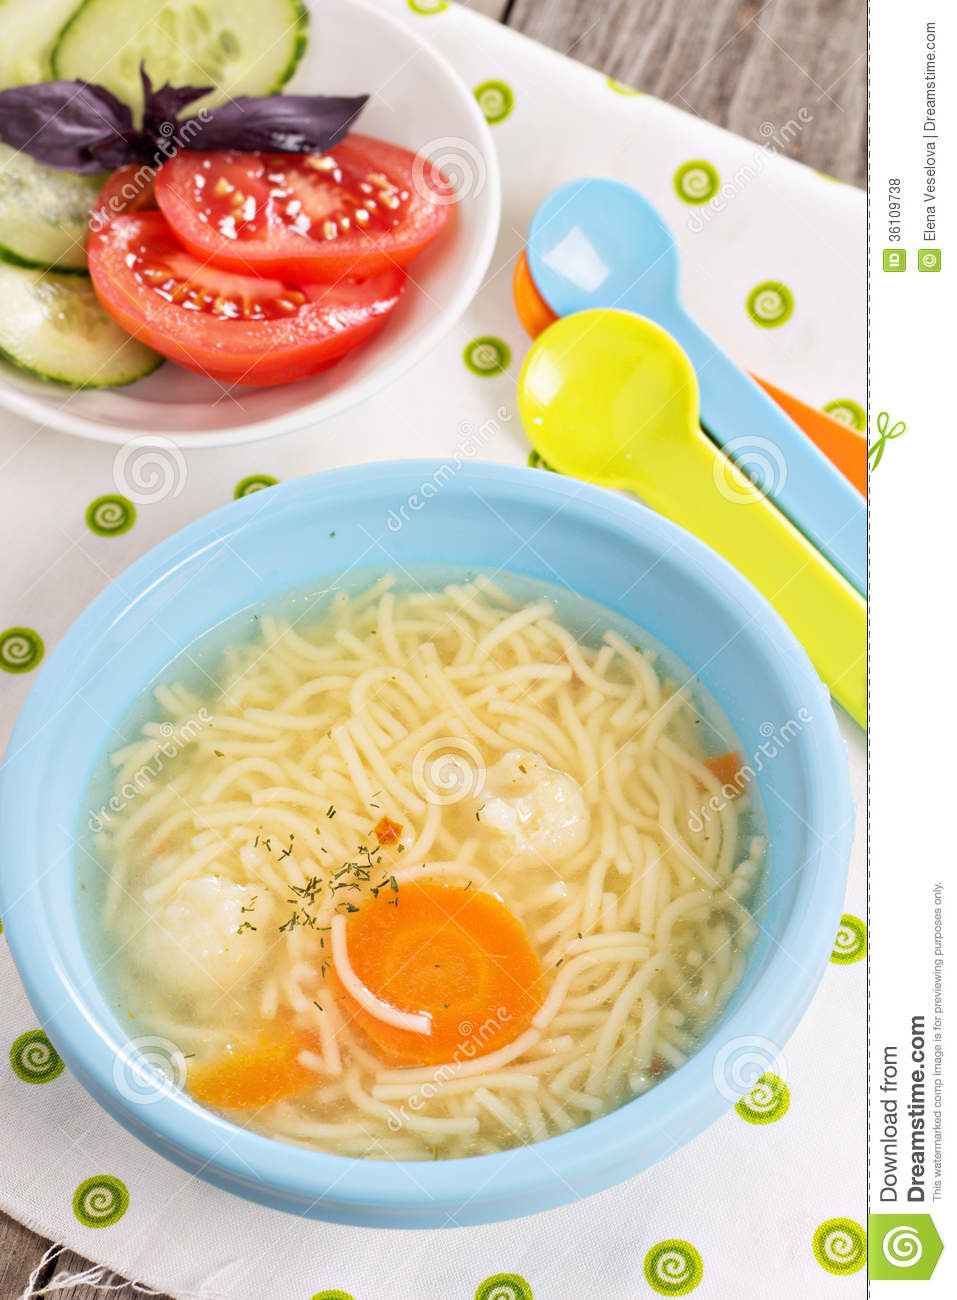 Chicken Soup For Kids
 Chicken soup for children stock photo Image of food